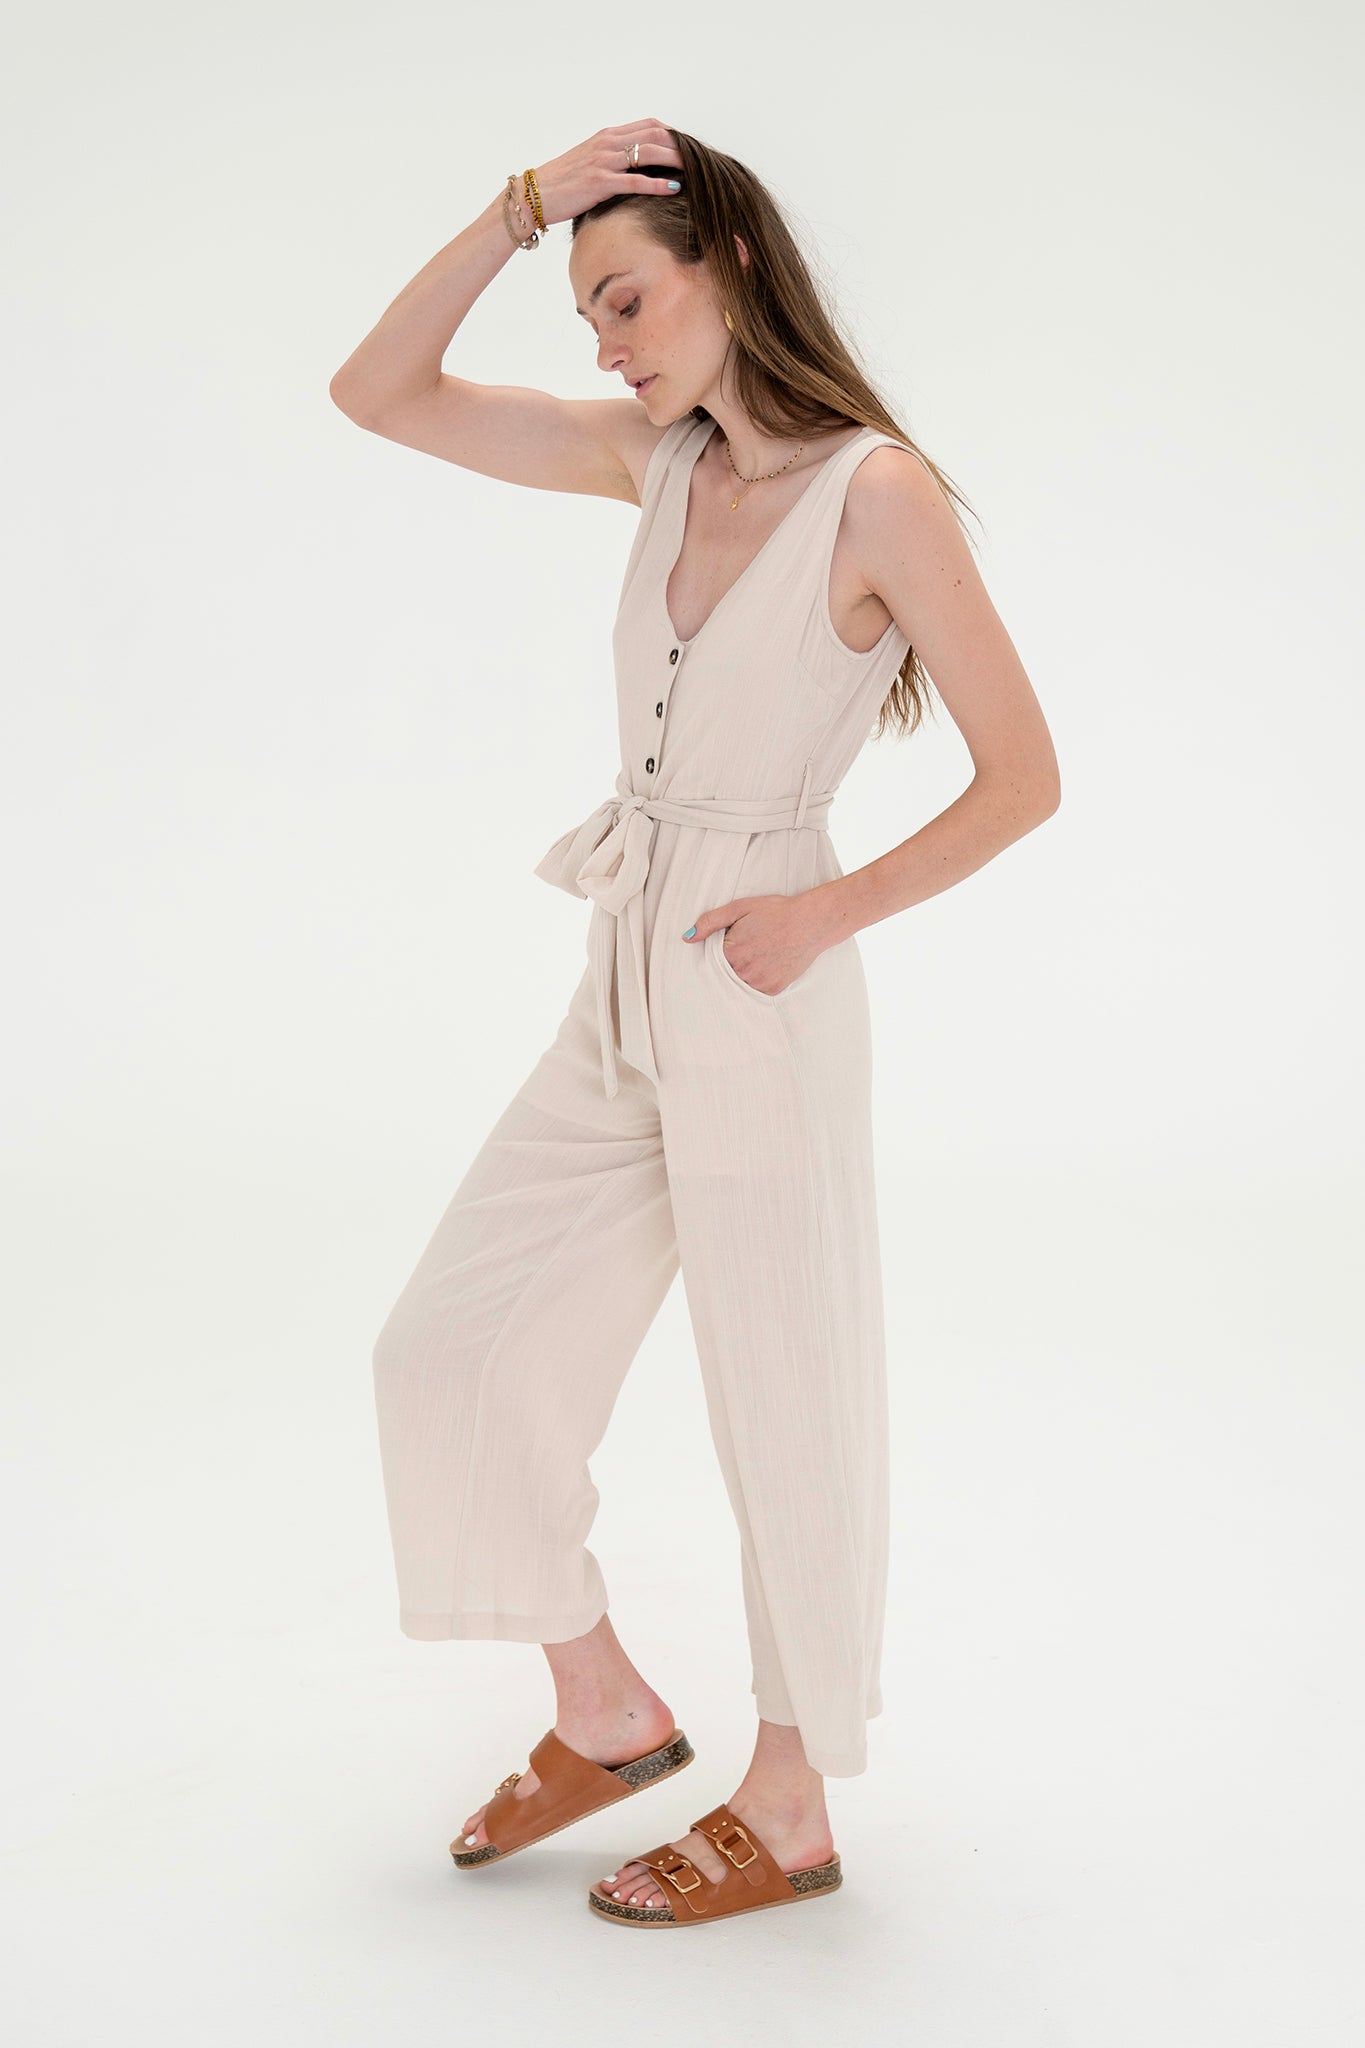 View 6 of Medanos Jumpsuit, a Jumpsuits from Larrea Cove. Detail: .